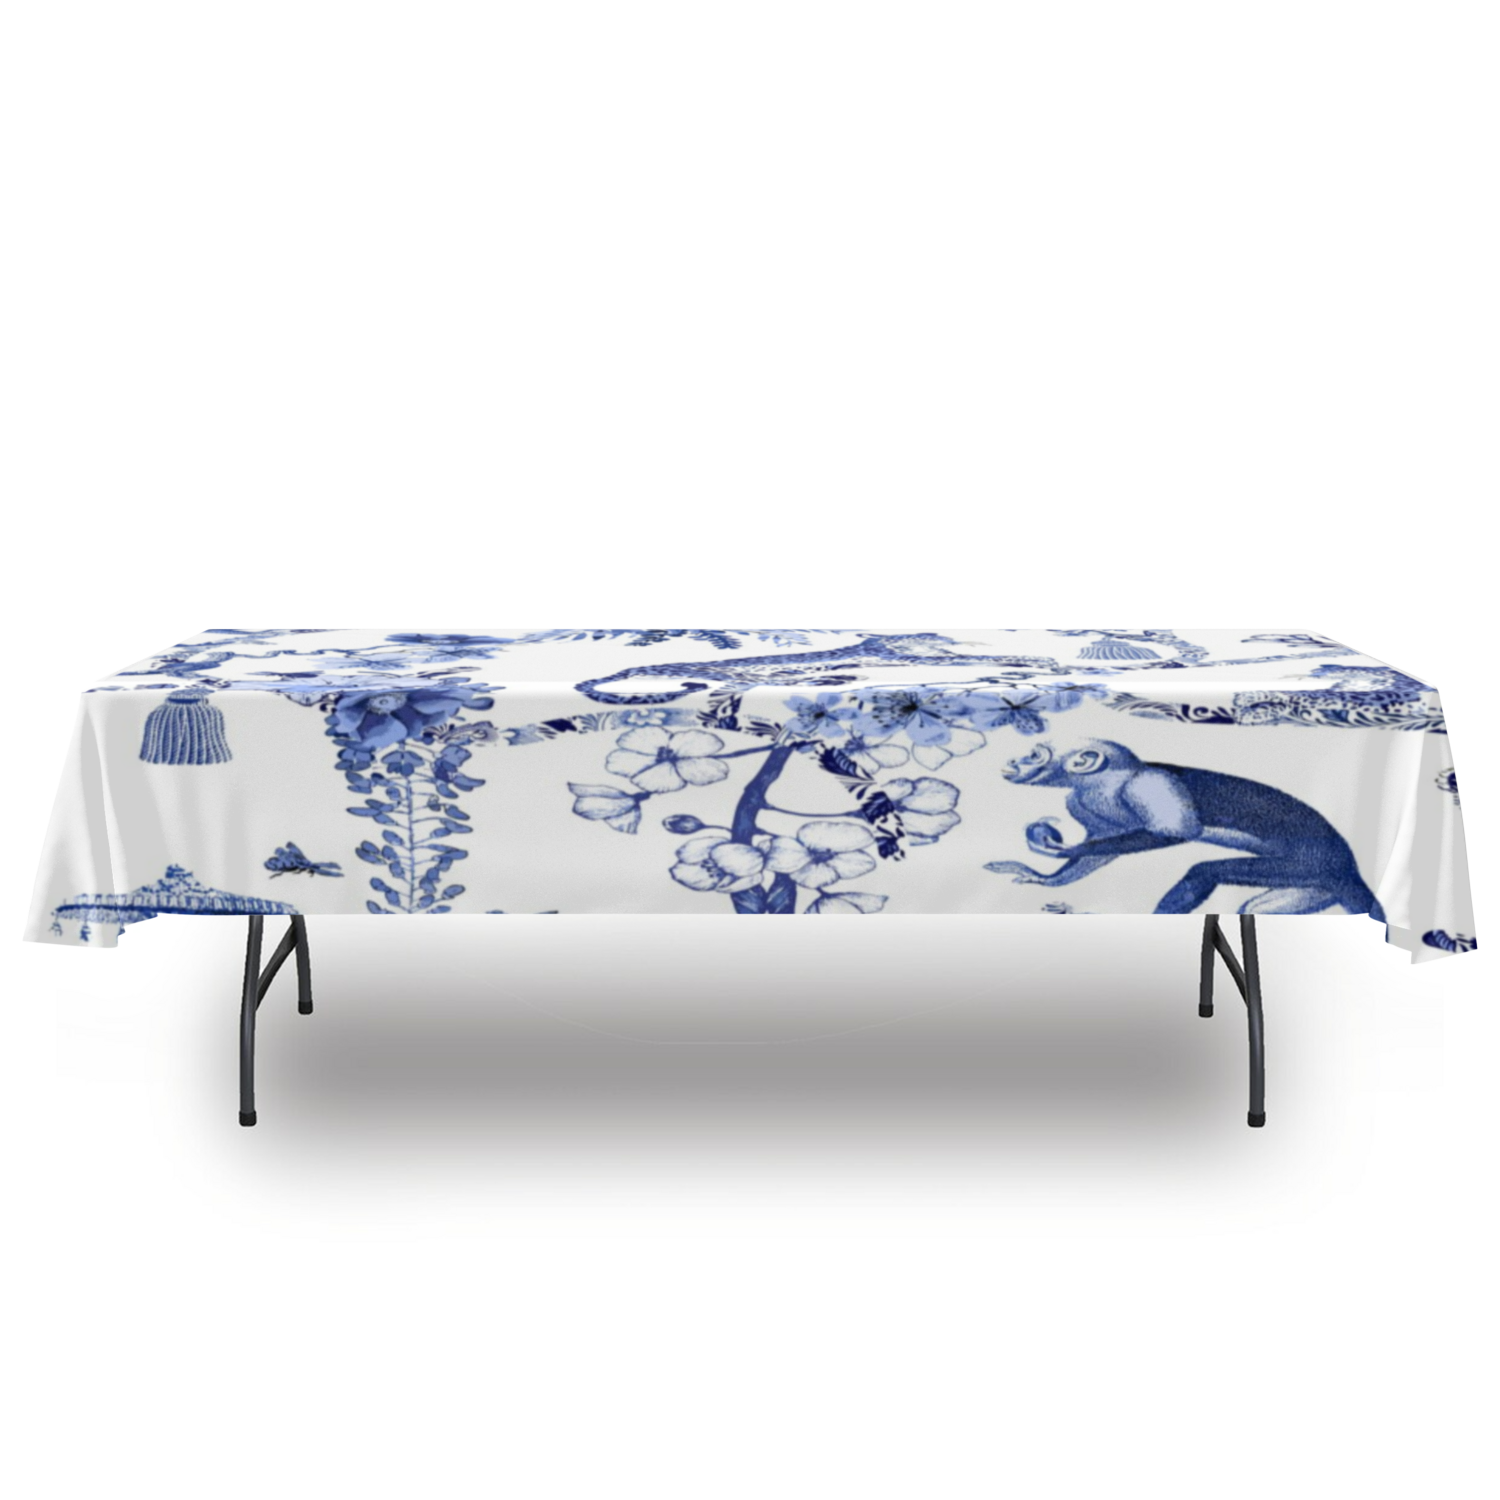 Chinoiserie Botanical Toile Rectangular Tablecloth, Floral Blue and White Chinoiserie Jungle Table Linen, Farmhouse Decor